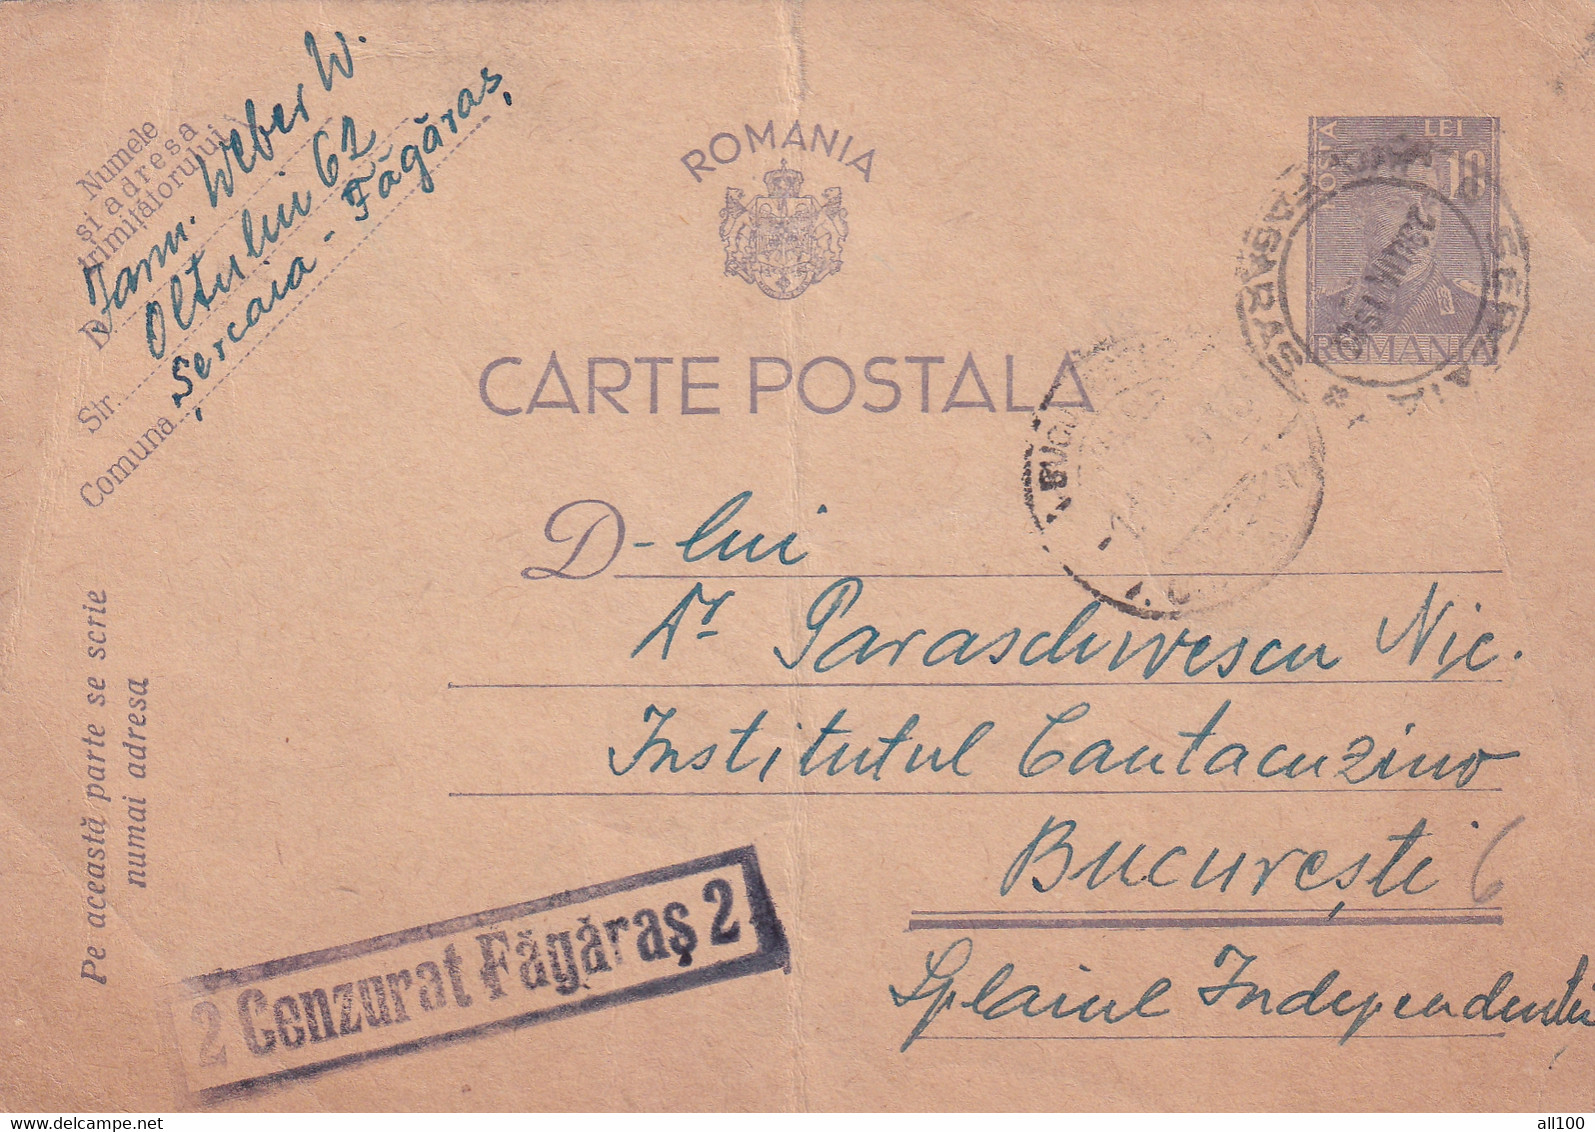 A16417 - MILITARY LETTER CENZURAT CENZORED FAGARAS KING MICHAEL 10 LEI  POSTAL STATIONERY 1943 - 2. Weltkrieg (Briefe)